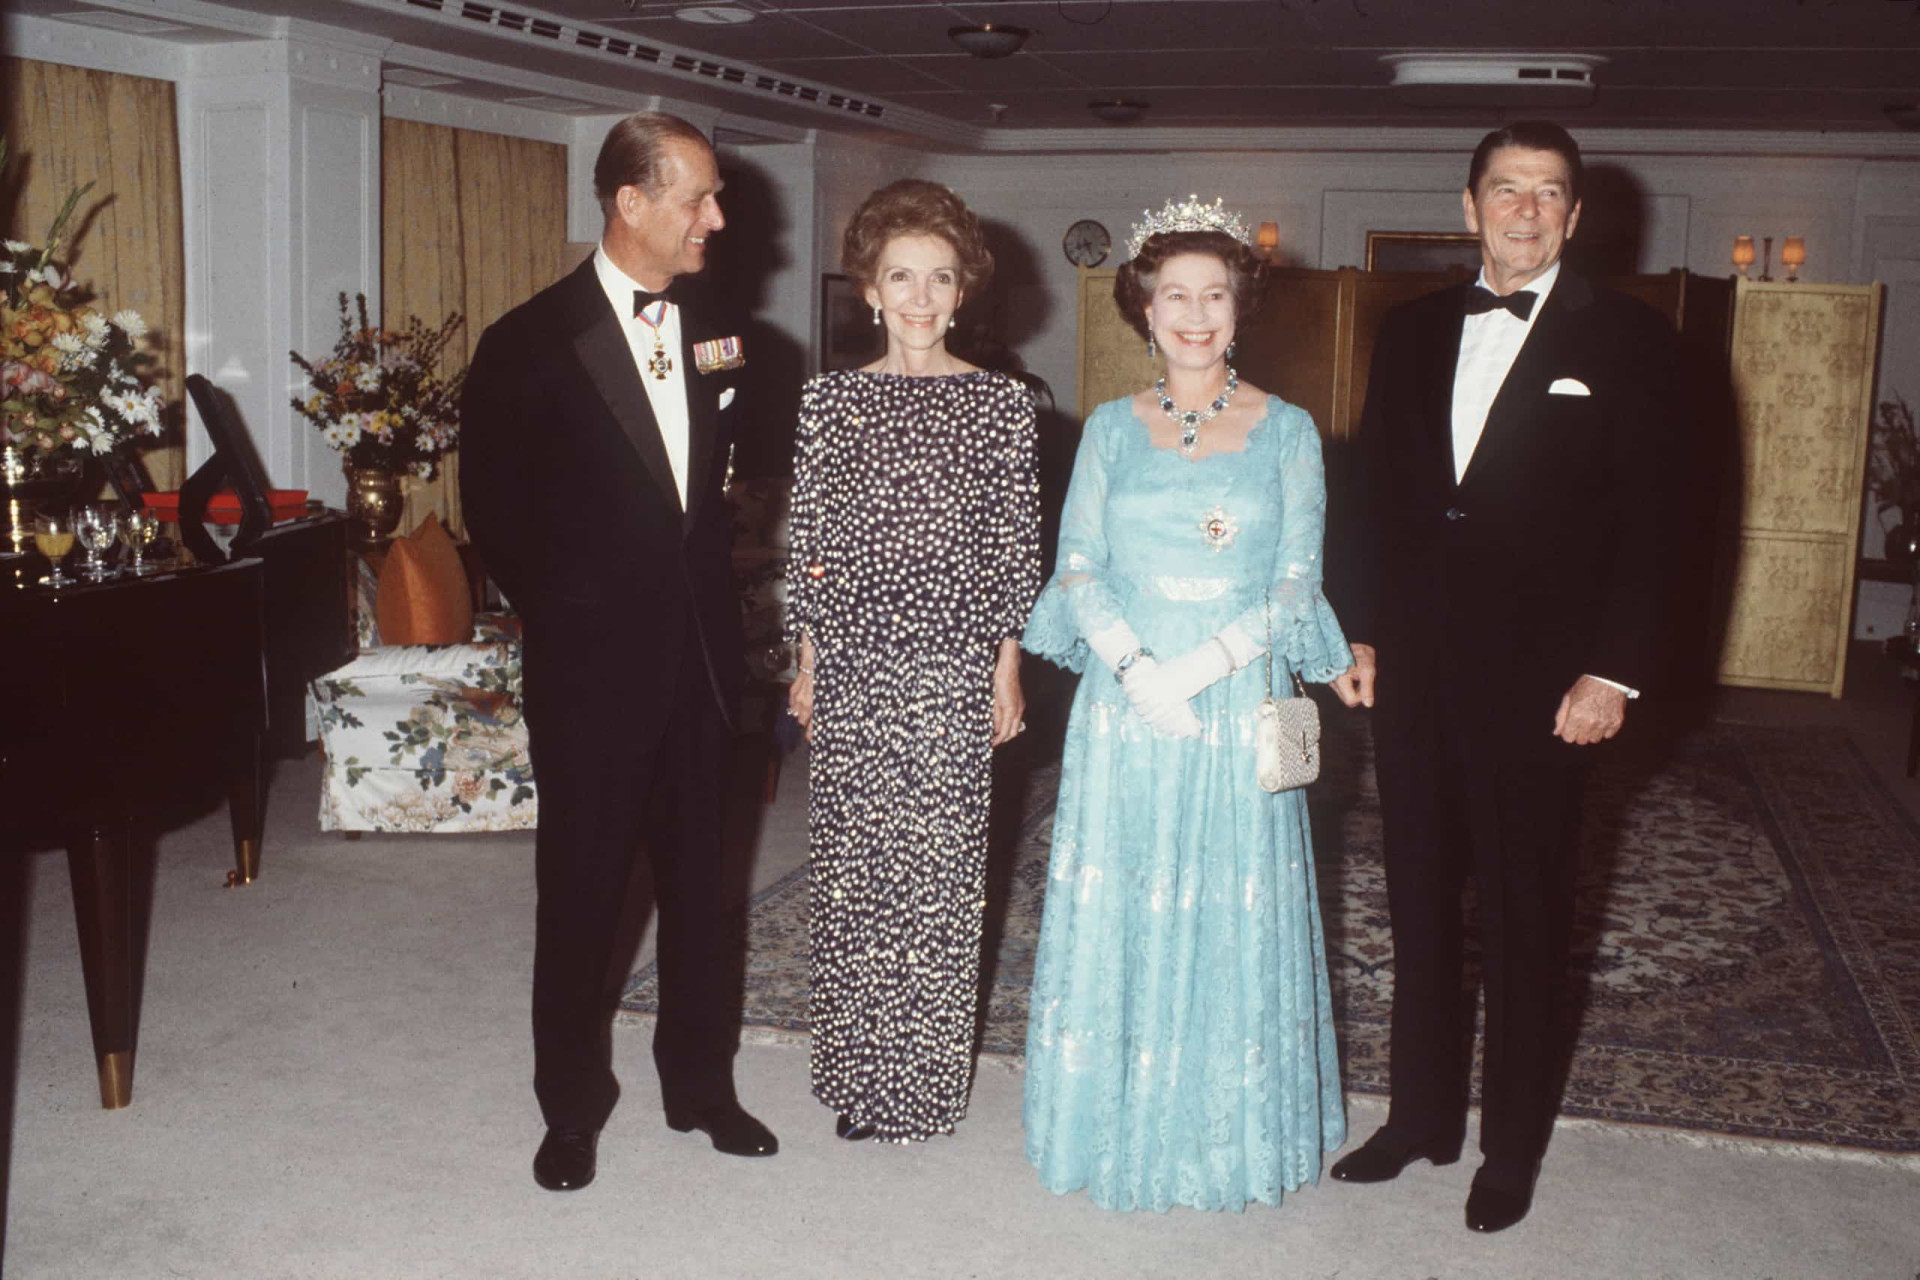 <p>Queen Elizabeth and Prince Philip with US President Ronald Reagan and his wife Nancy on board <em>Britannica</em> during an official tour of America in 1983. A banquet was held on the vessel on March 4, 1983 to celebrate the Reagan's wedding anniversary.</p><p><a href="https://www.msn.com/en-ph/community/channel/vid-7xx8mnucu55yw63we9va2gwr7uihbxwc68fxqp25x6tg4ftibpra?cvid=94631541bc0f4f89bfd59158d696ad7e">Follow us and access great exclusive content every day</a></p>